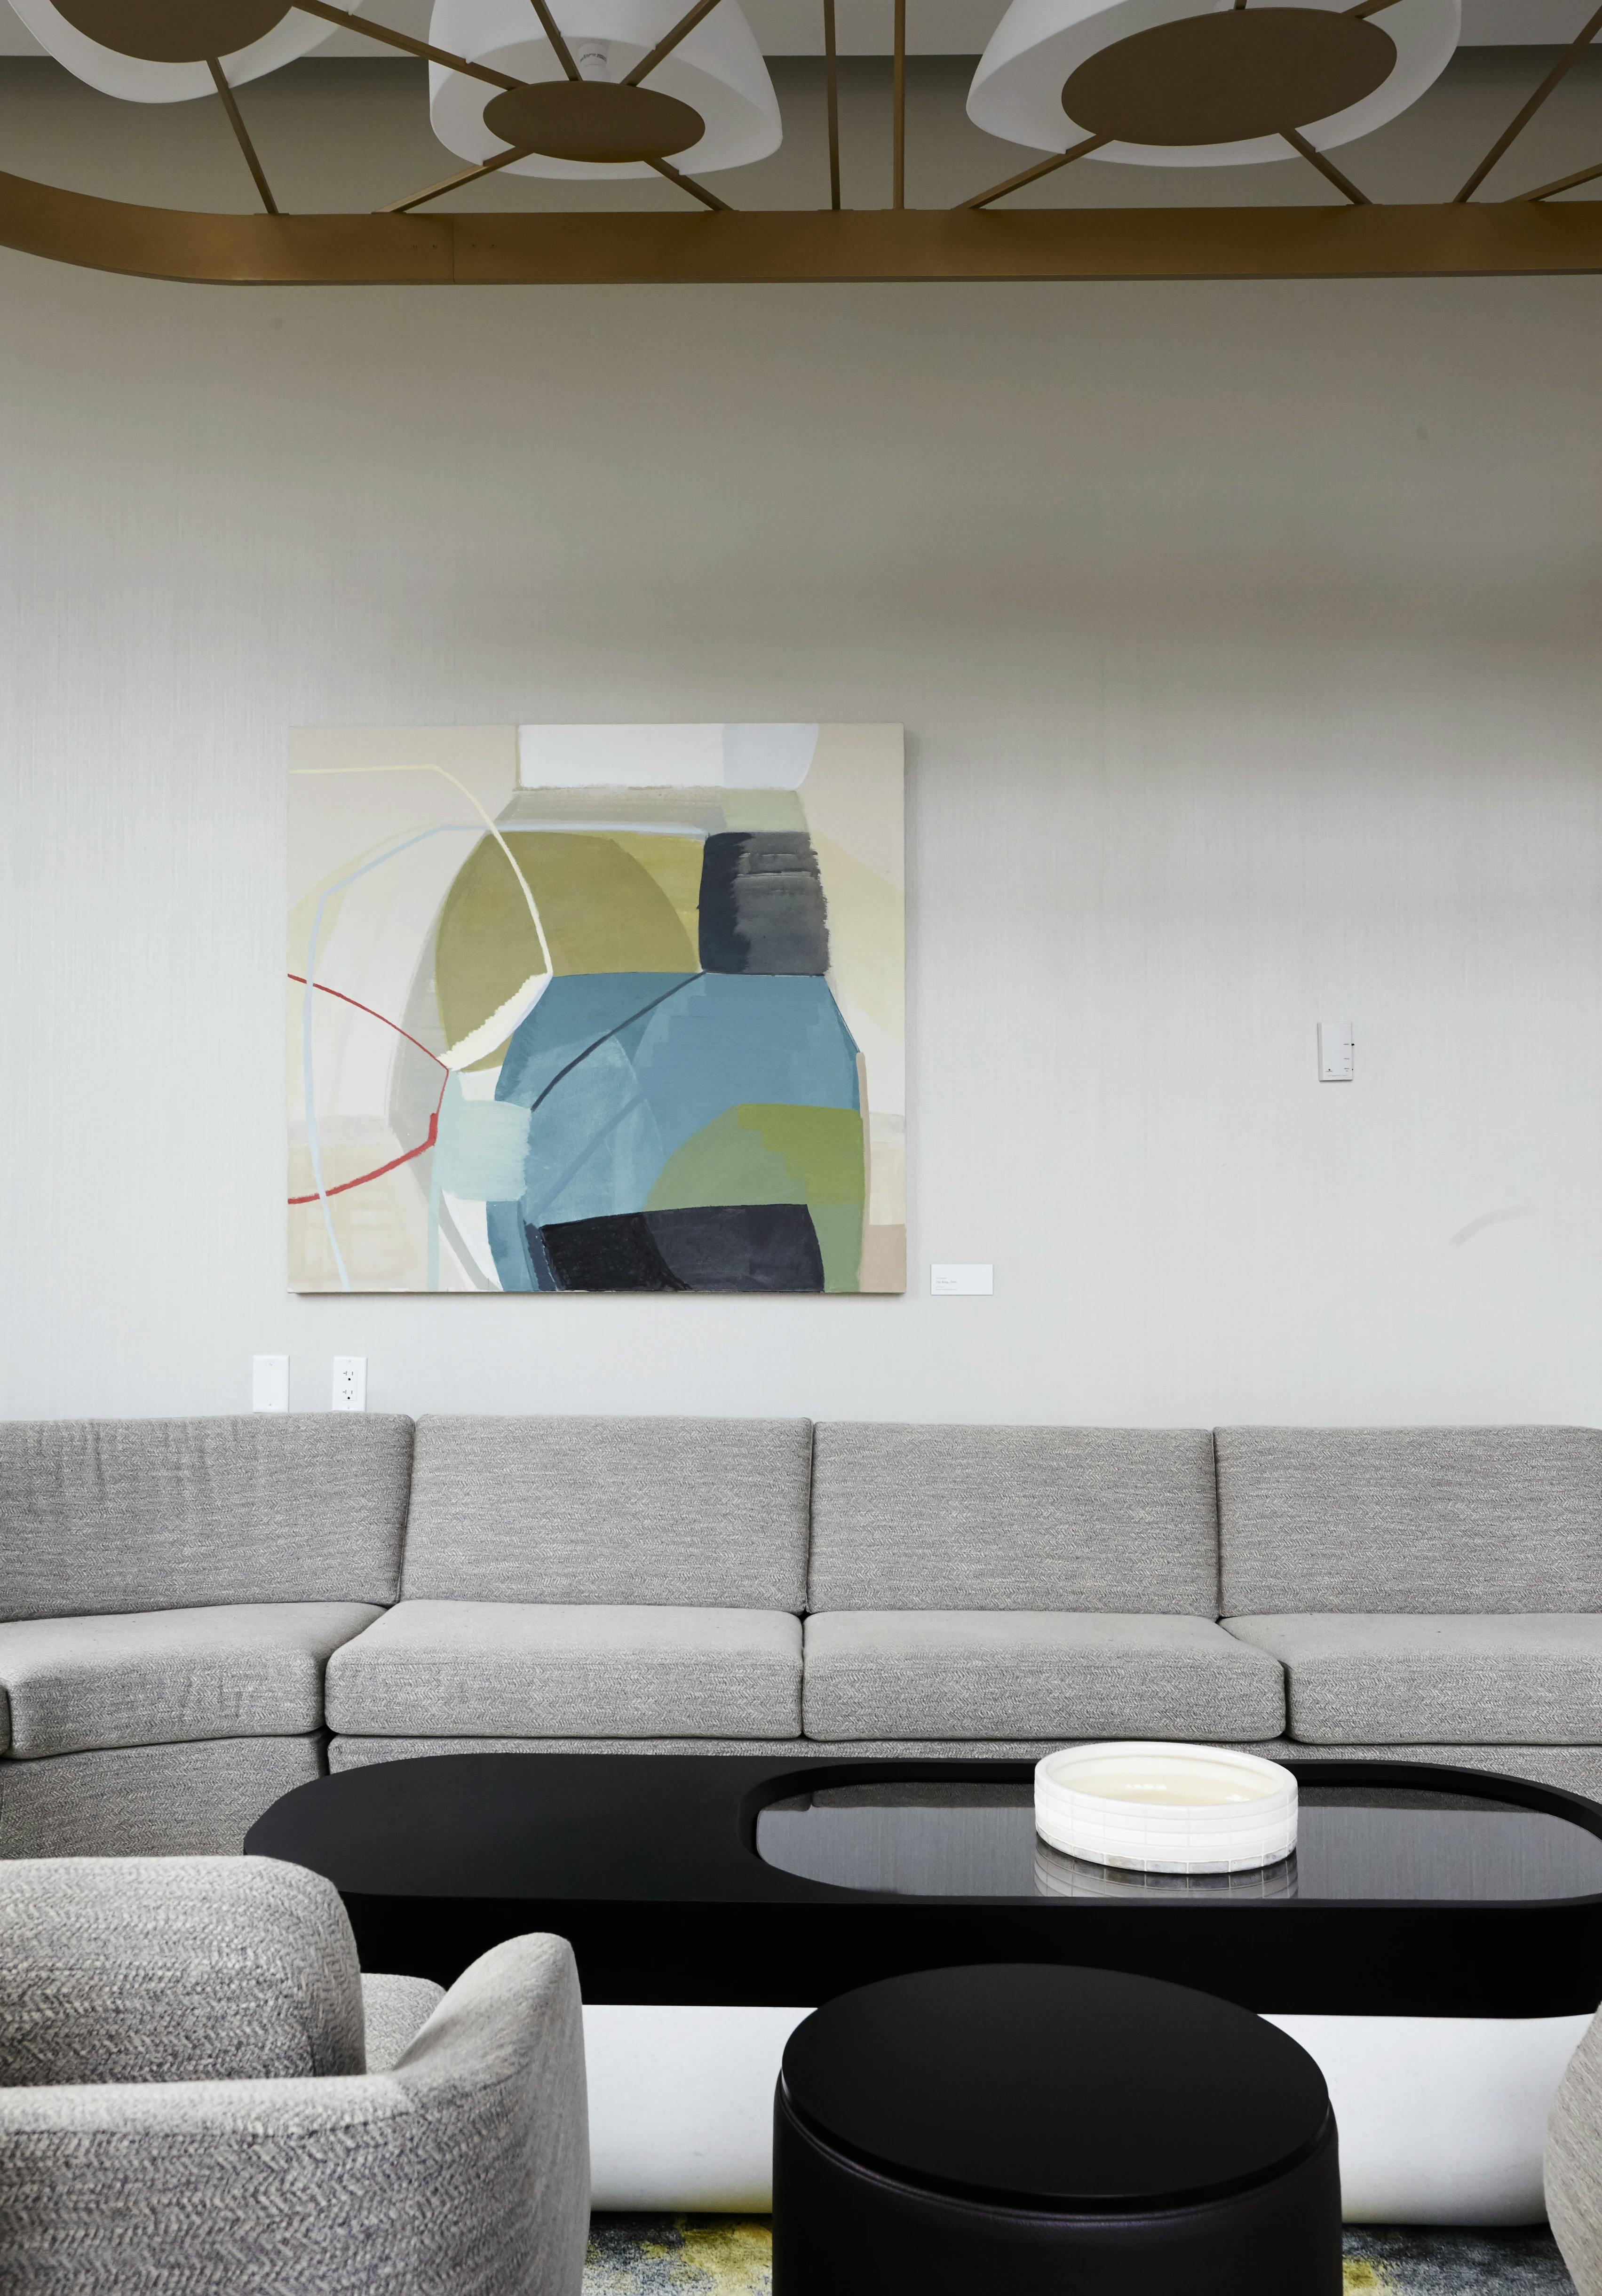 Gestural abstract painting on canvas by artist Ky Anderson installed above a grey sectional sofa in a lounge area.